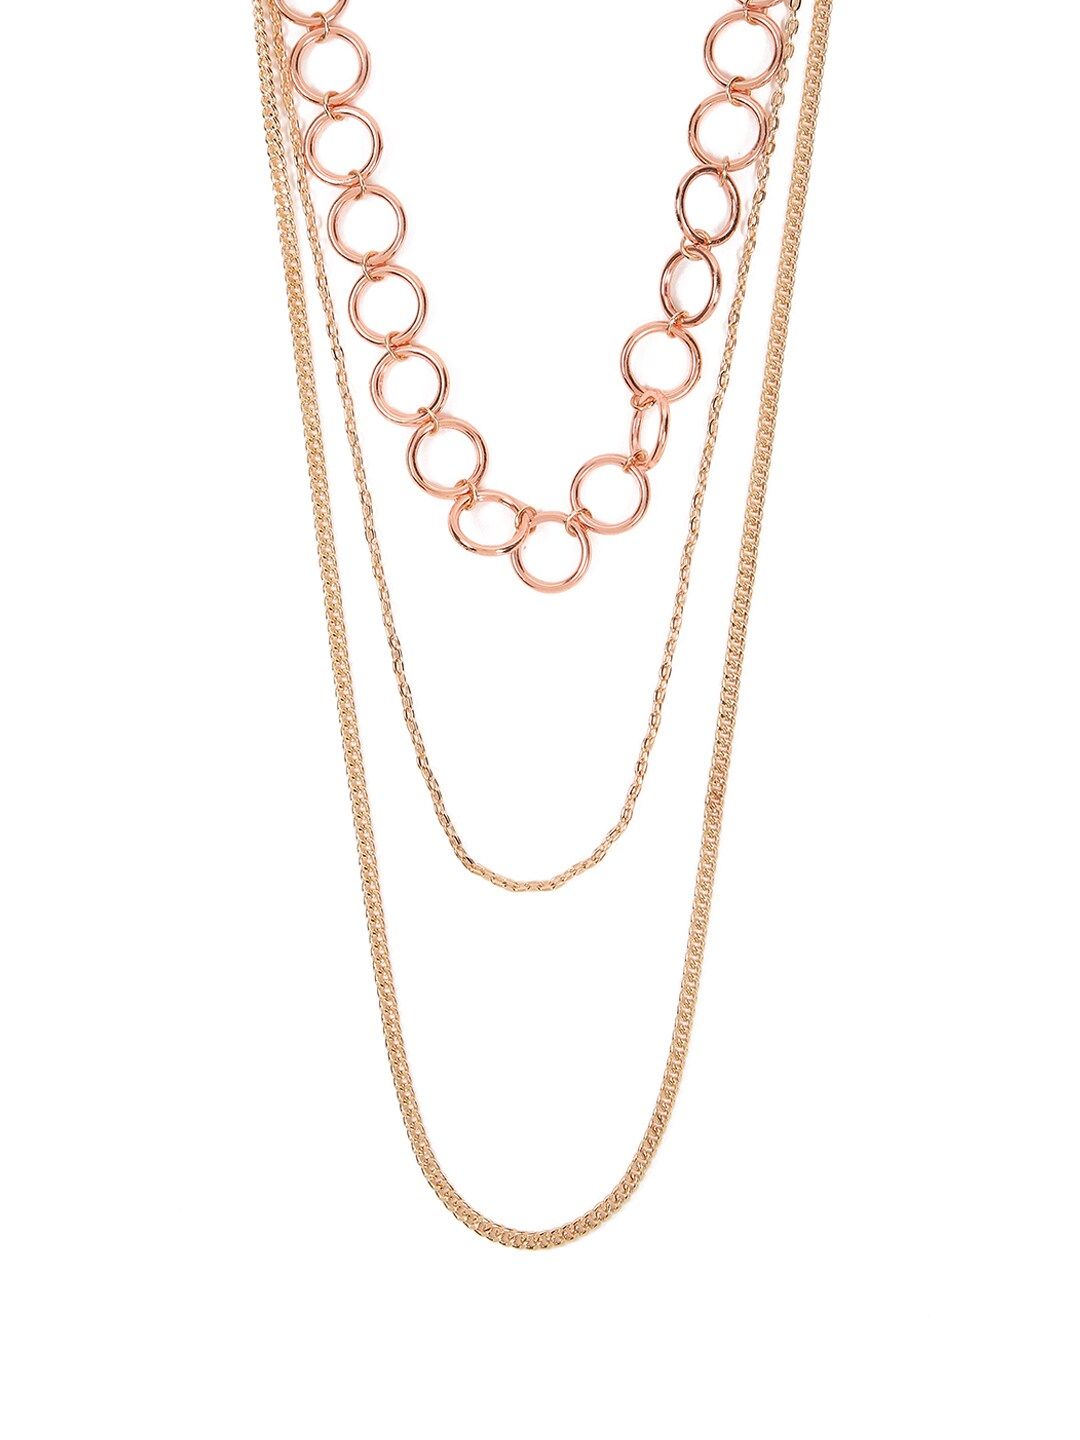 FOREVER 21 Gold-Toned Metal Layered Necklace Price in India